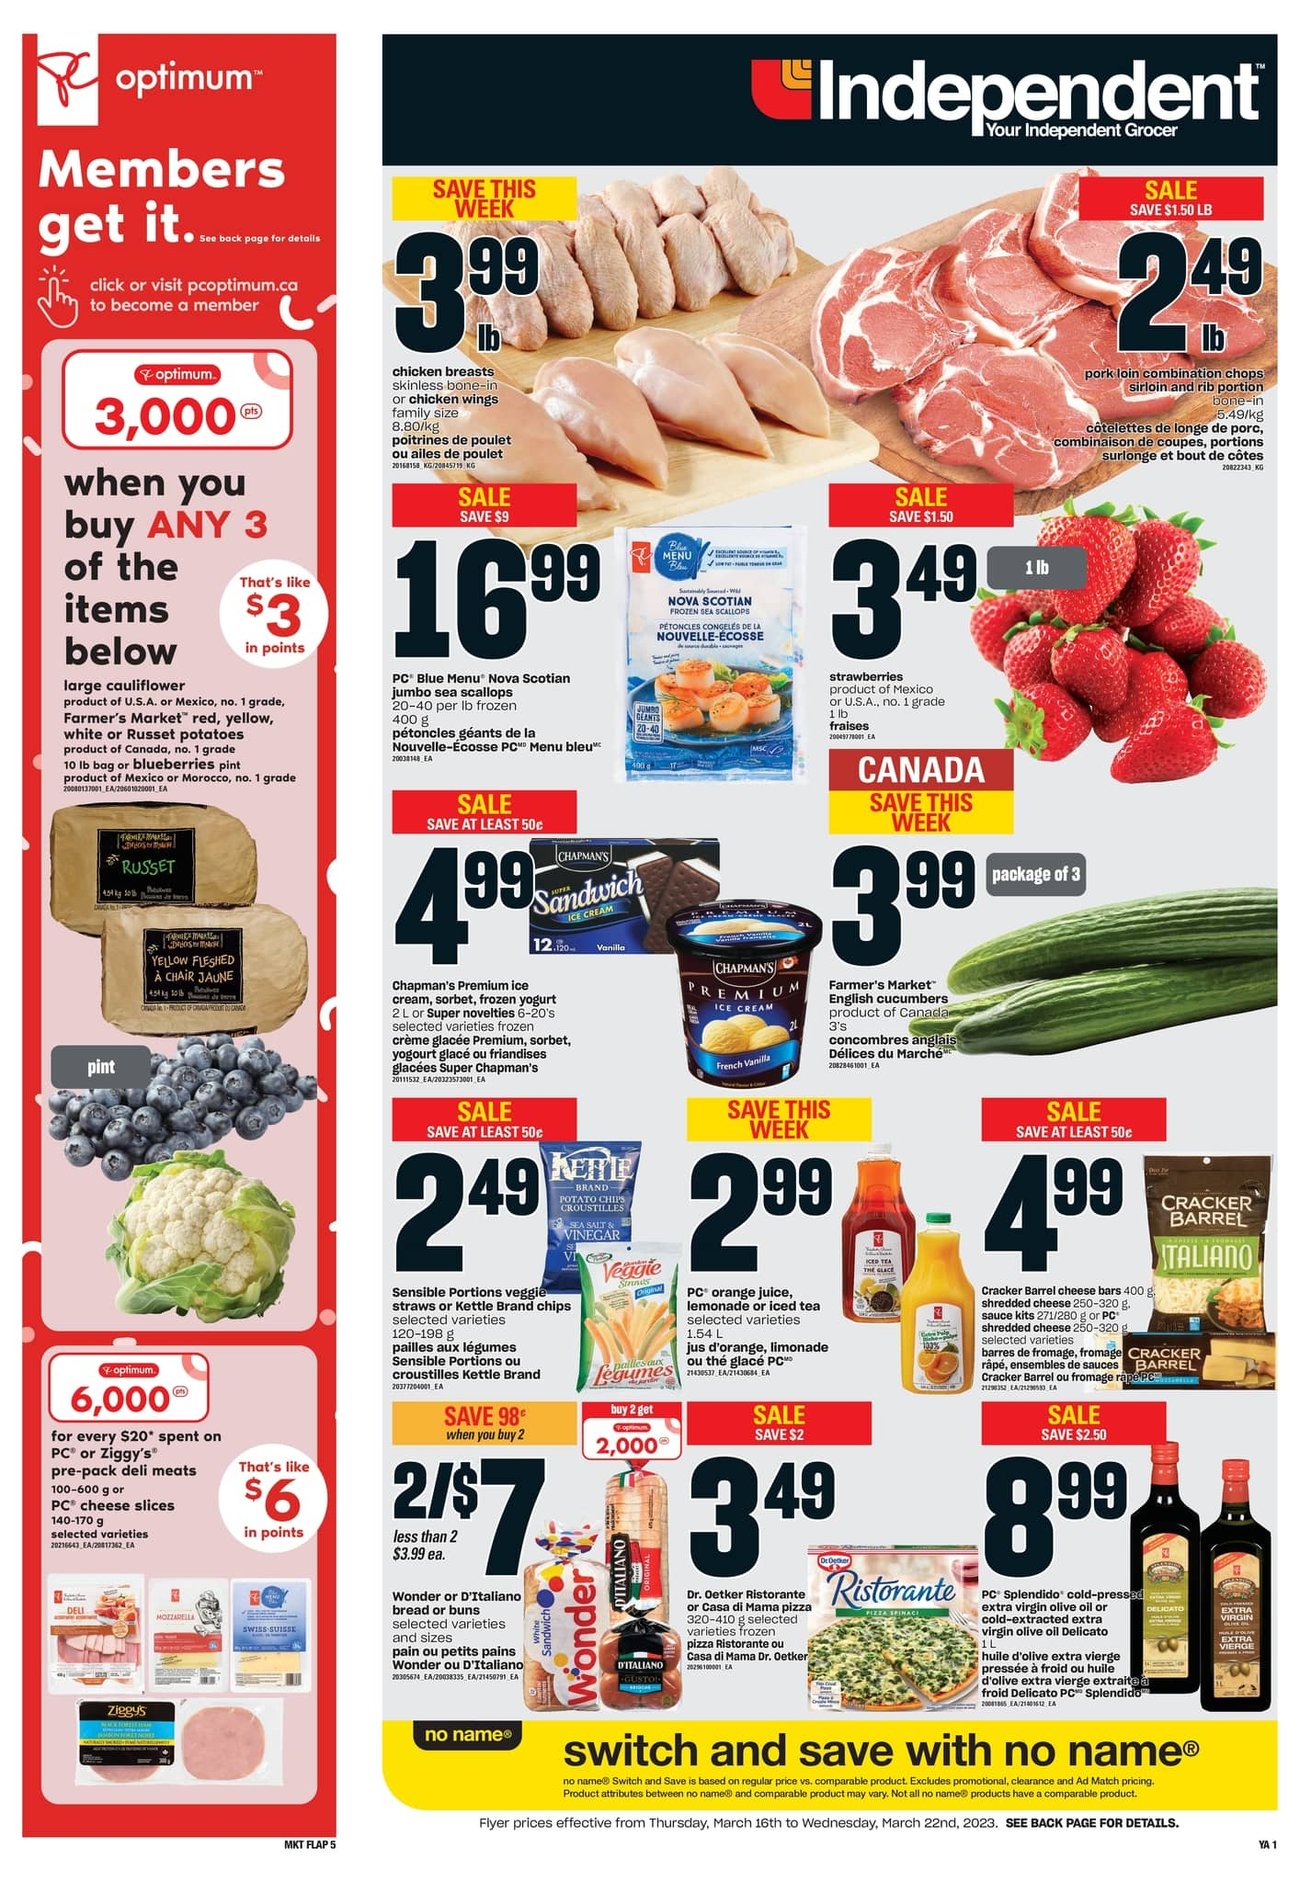 Independent - Atlantic - Weekly Flyer Specials - Page 1